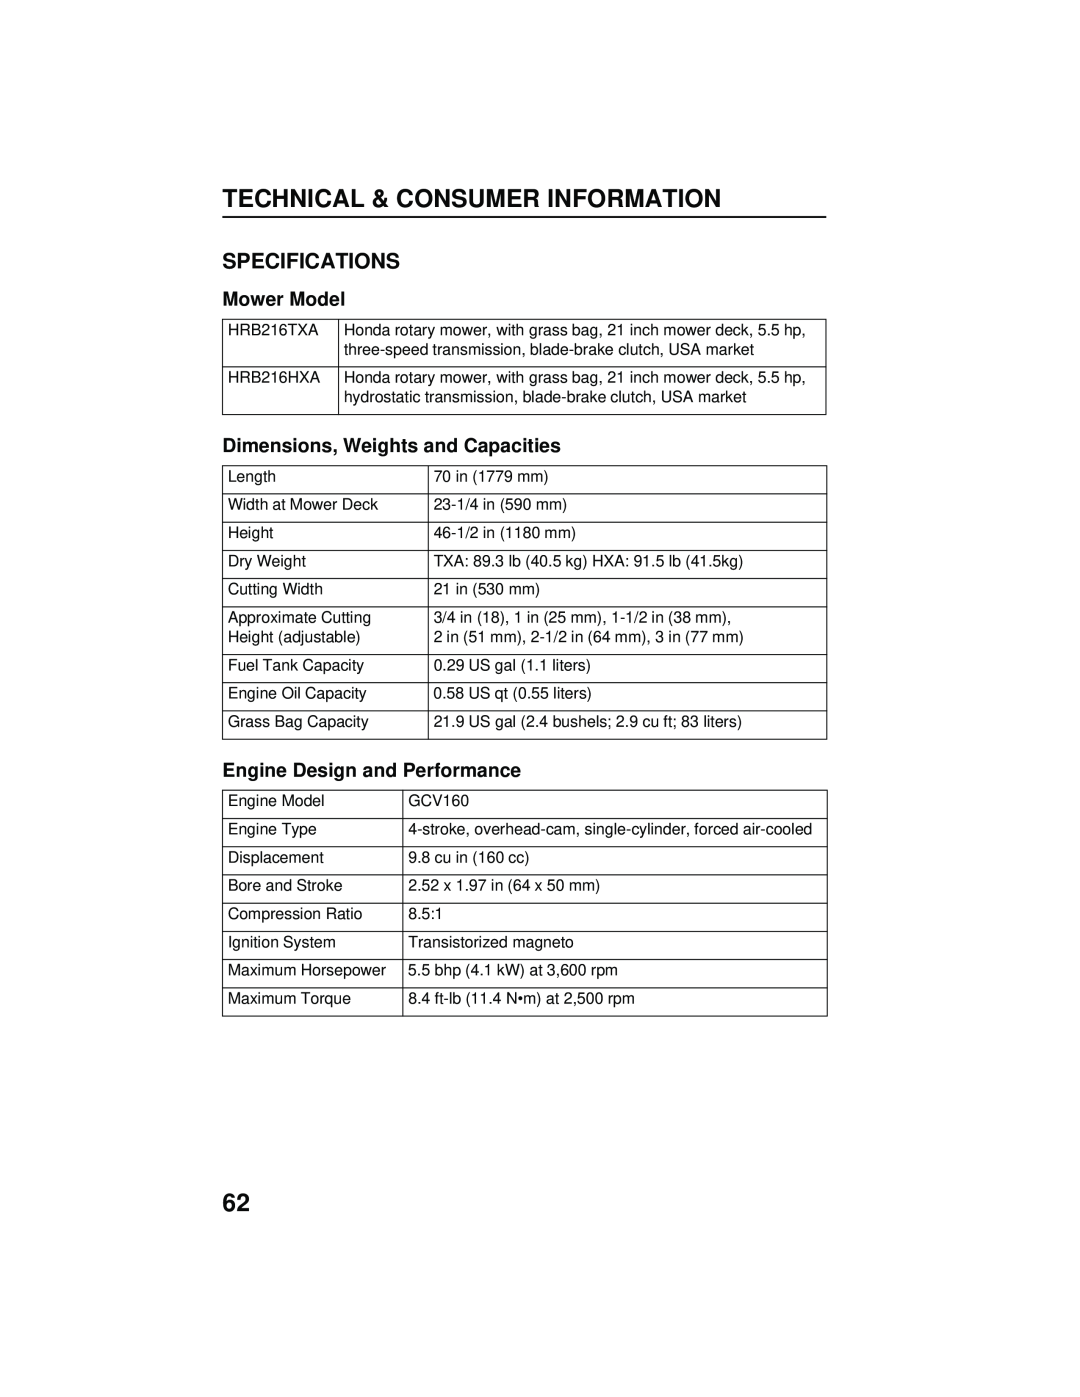 Honda Power Equipment HRB216TXA owner manual Specifications, Mower Model, Dimensions, Weights and Capacities 